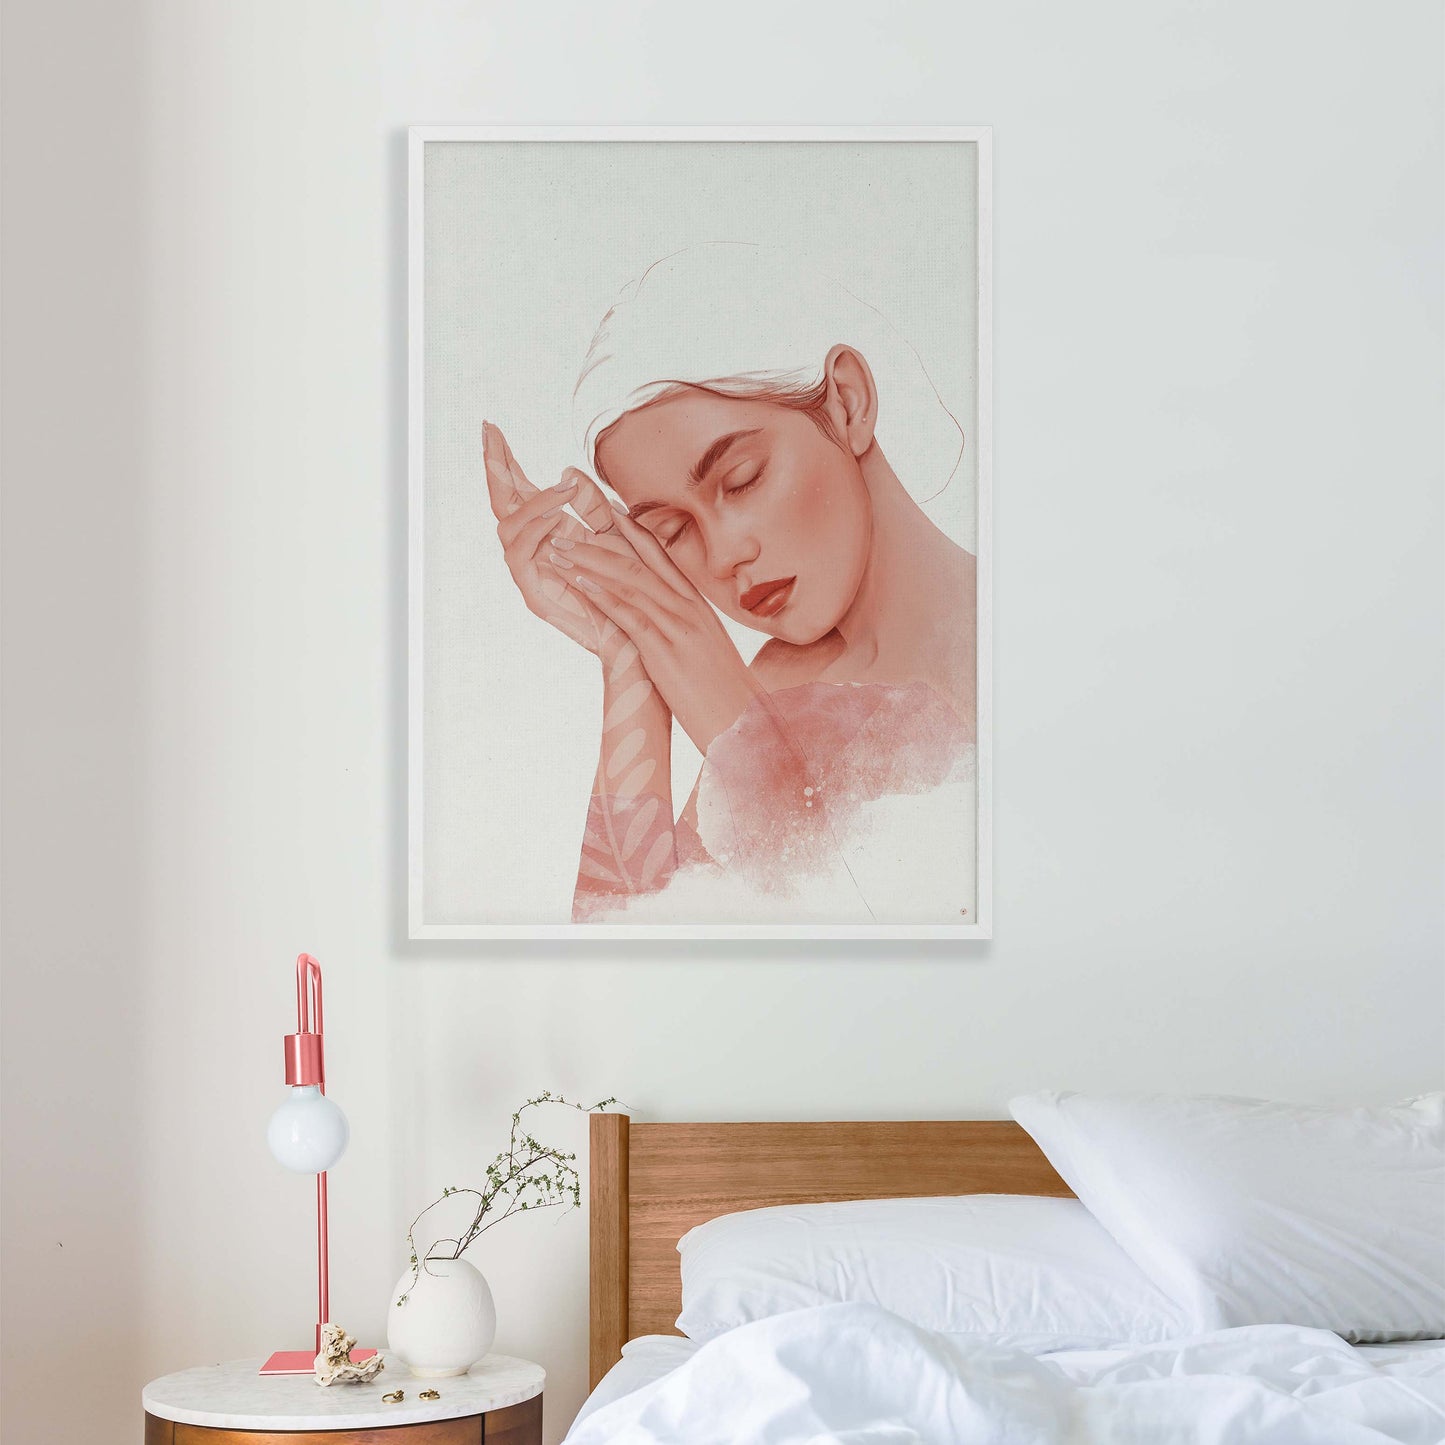 female portrait in rose gold & shades of pink colors art poster displayed in white frame in bedroom